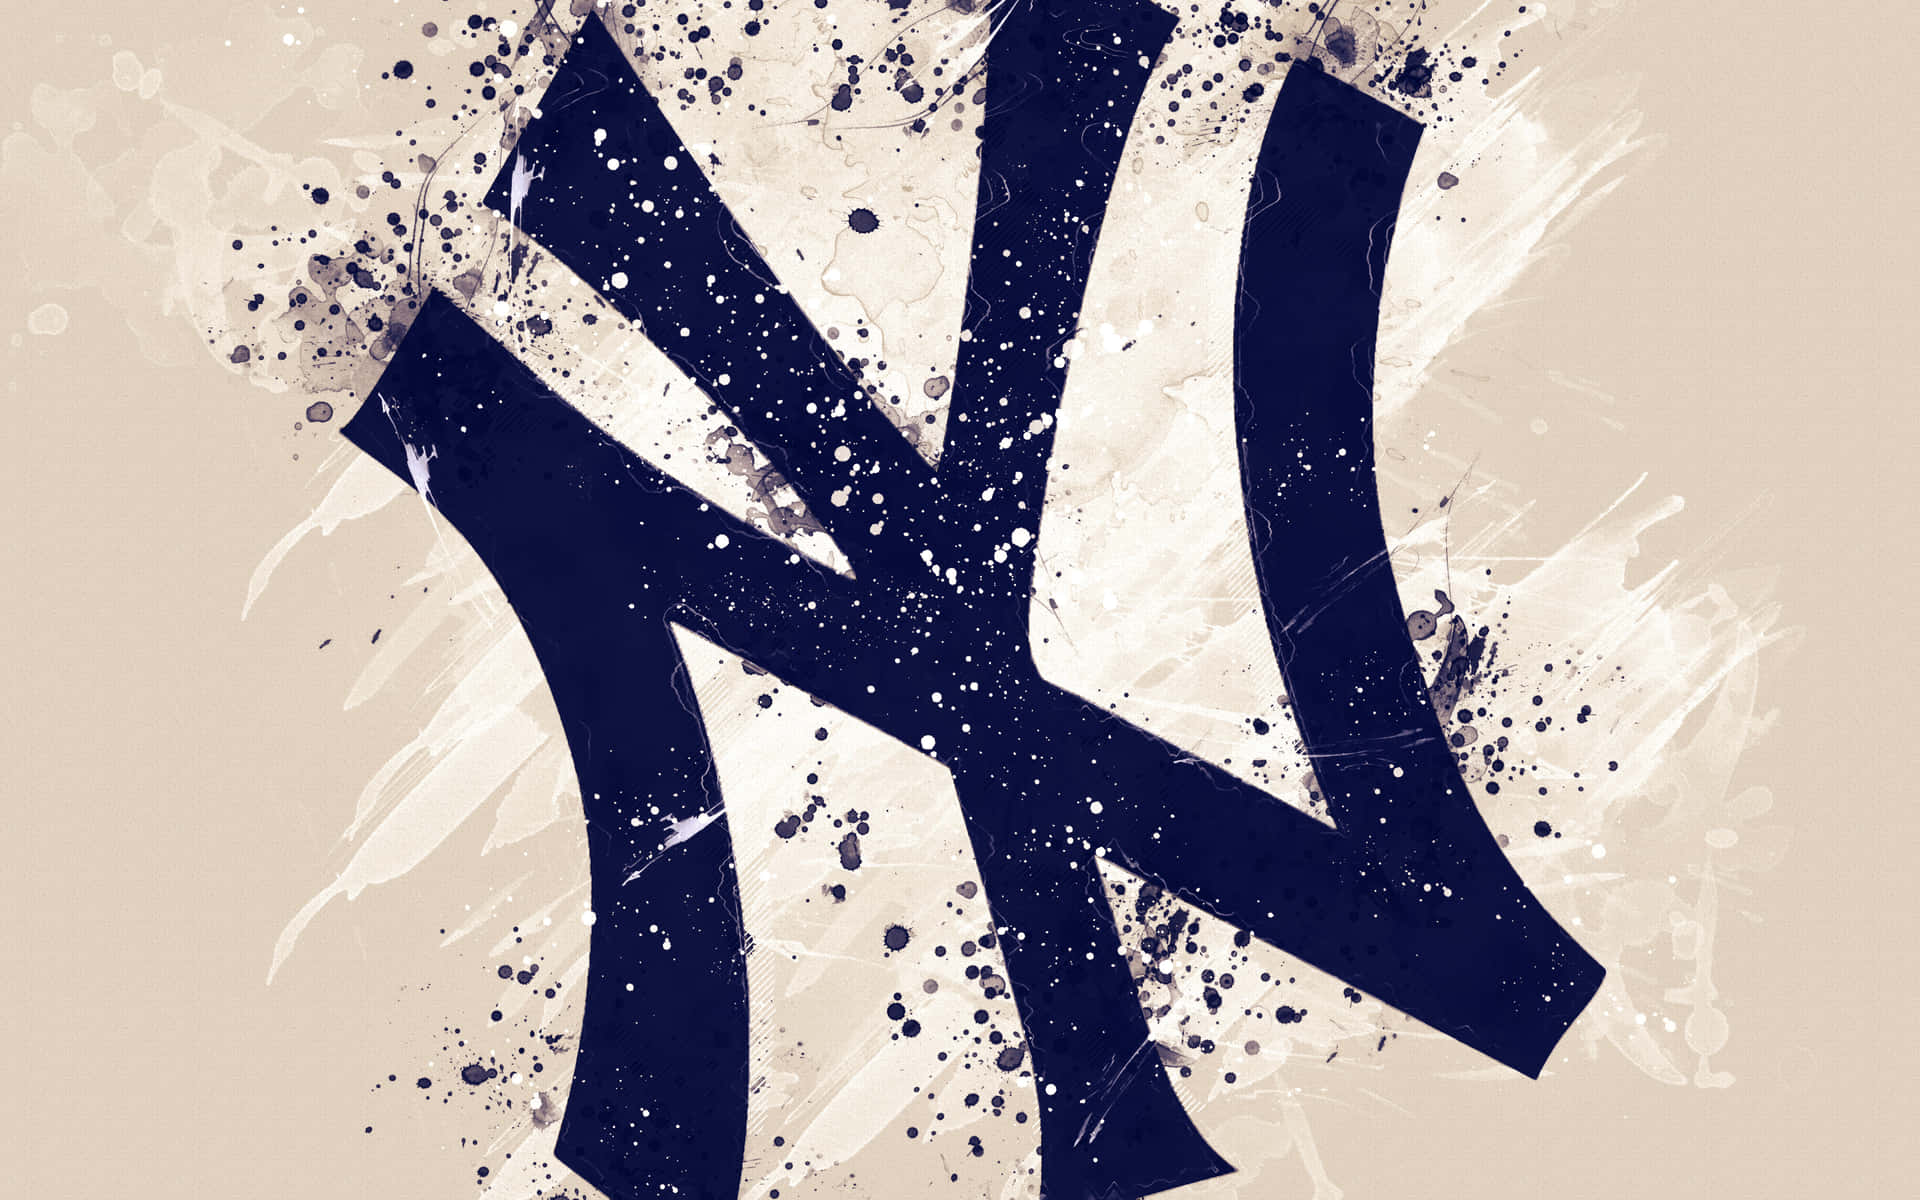 Feel the energy of the New York Yankees in this vibrant HD image! Wallpaper